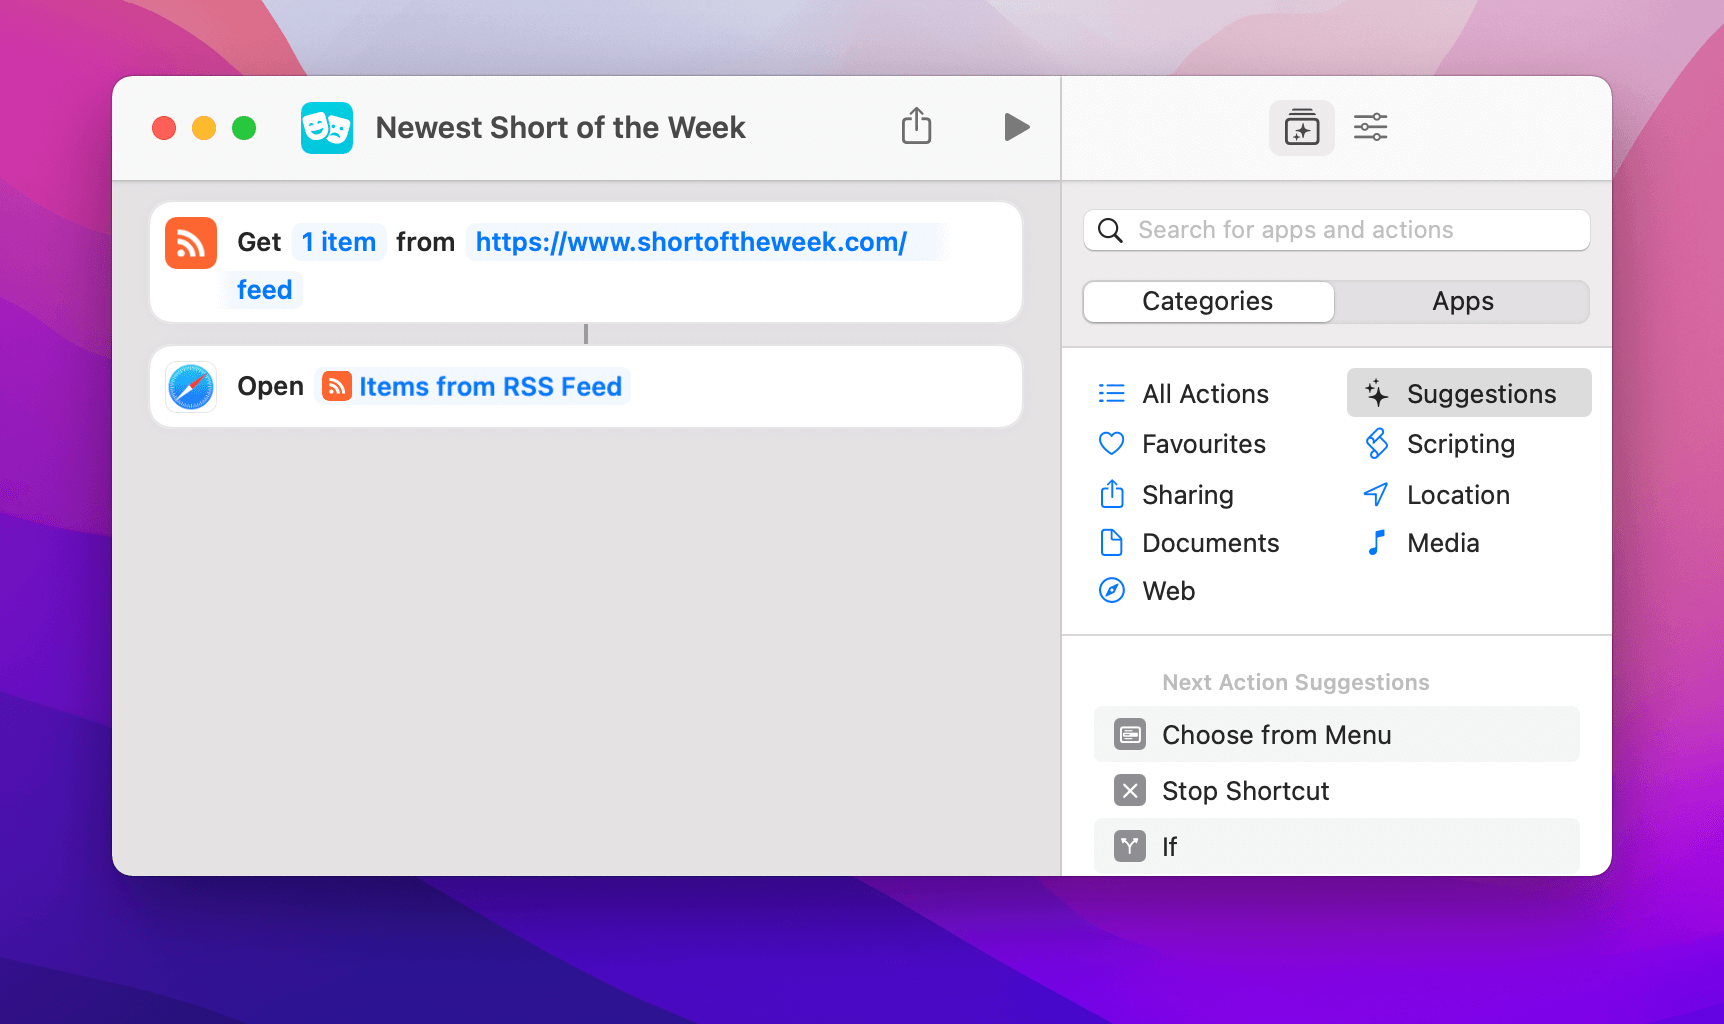 Newest Short of the Week shortcut layout